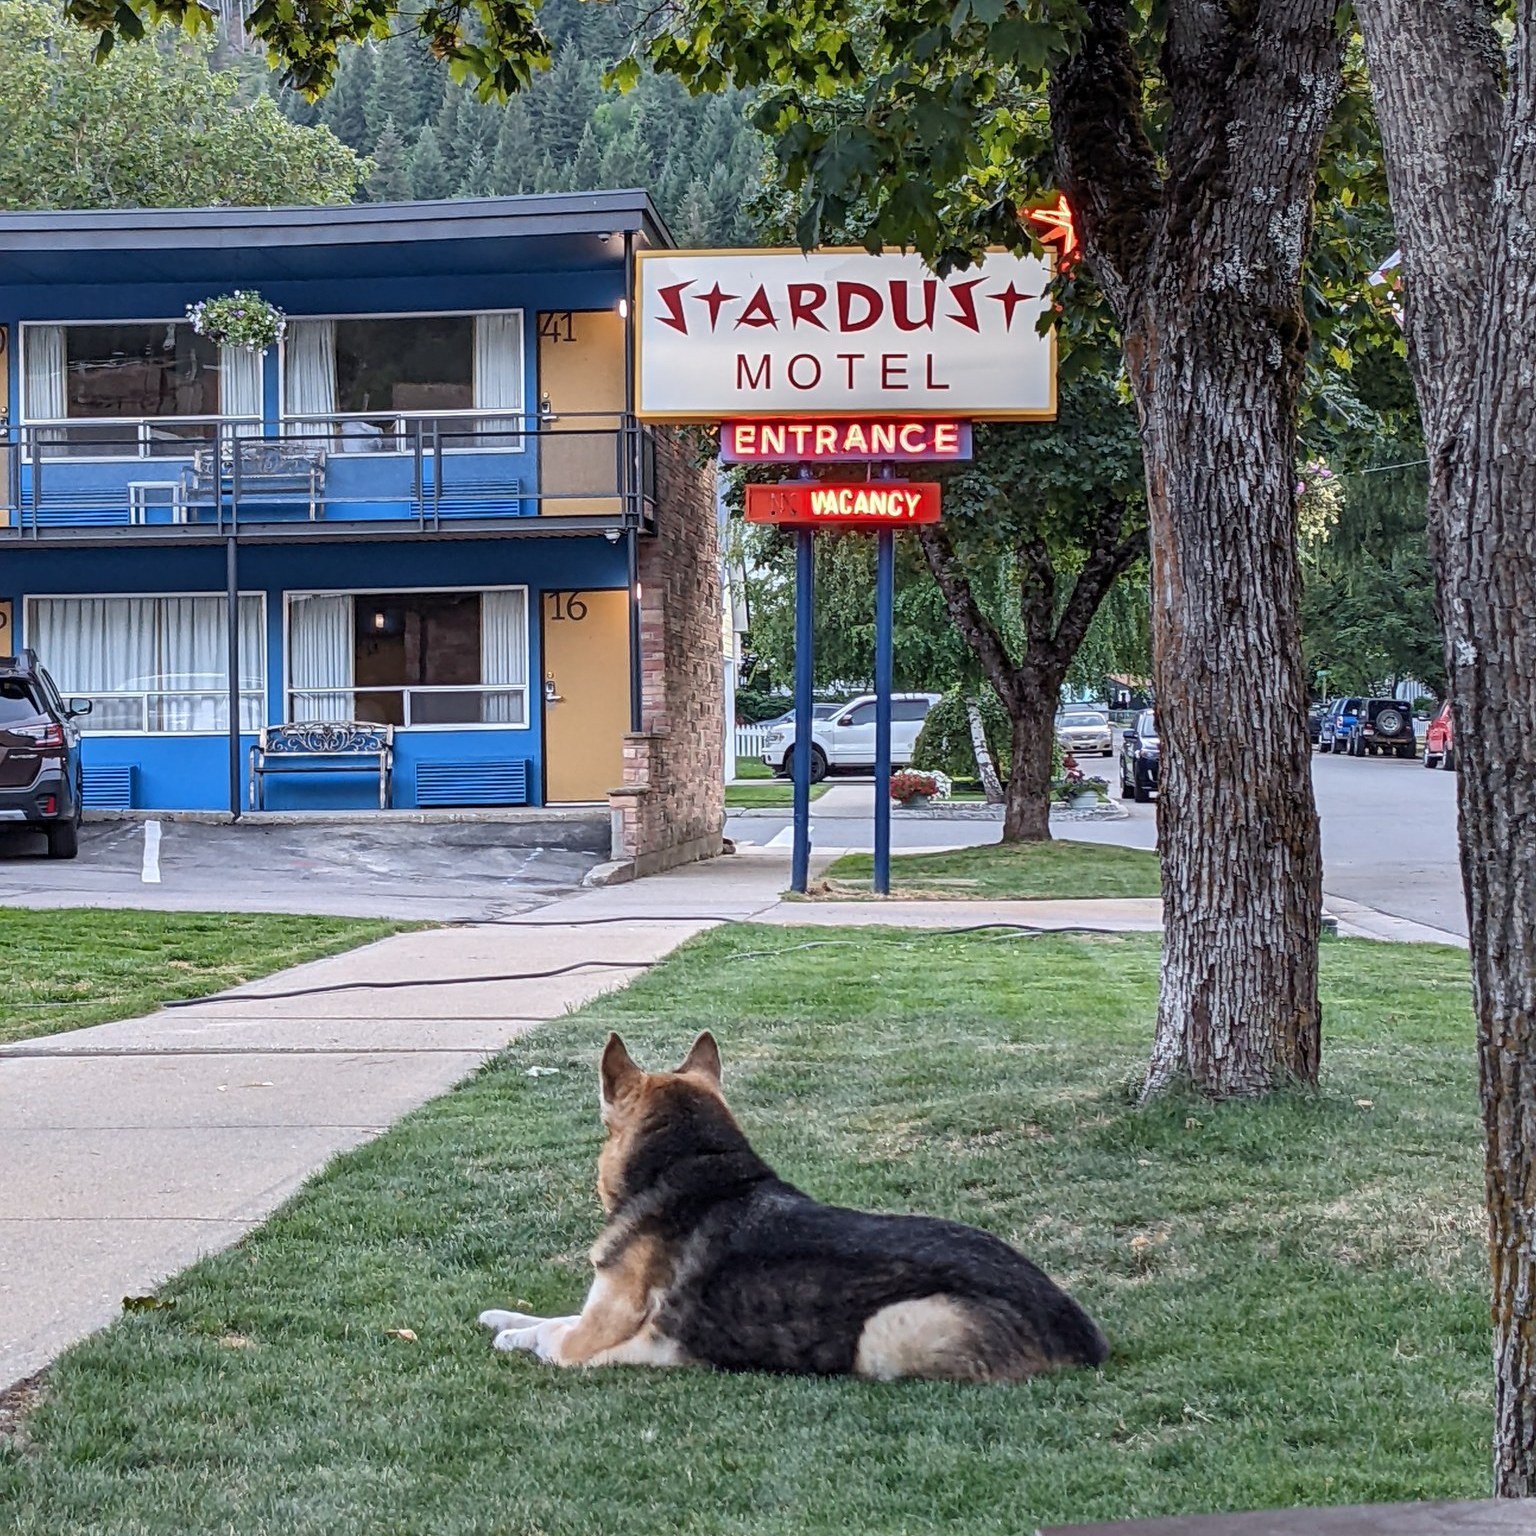 Calling all adventure-loving pups! 🐾 Experience the pet-friendly charm of Wallace, Idaho, starting with a stay at Stardust Motel! Our neon-lit haven welcomes furry explorers with open arms. Plus, discover Wallace's pet-friendly patios and unleash th